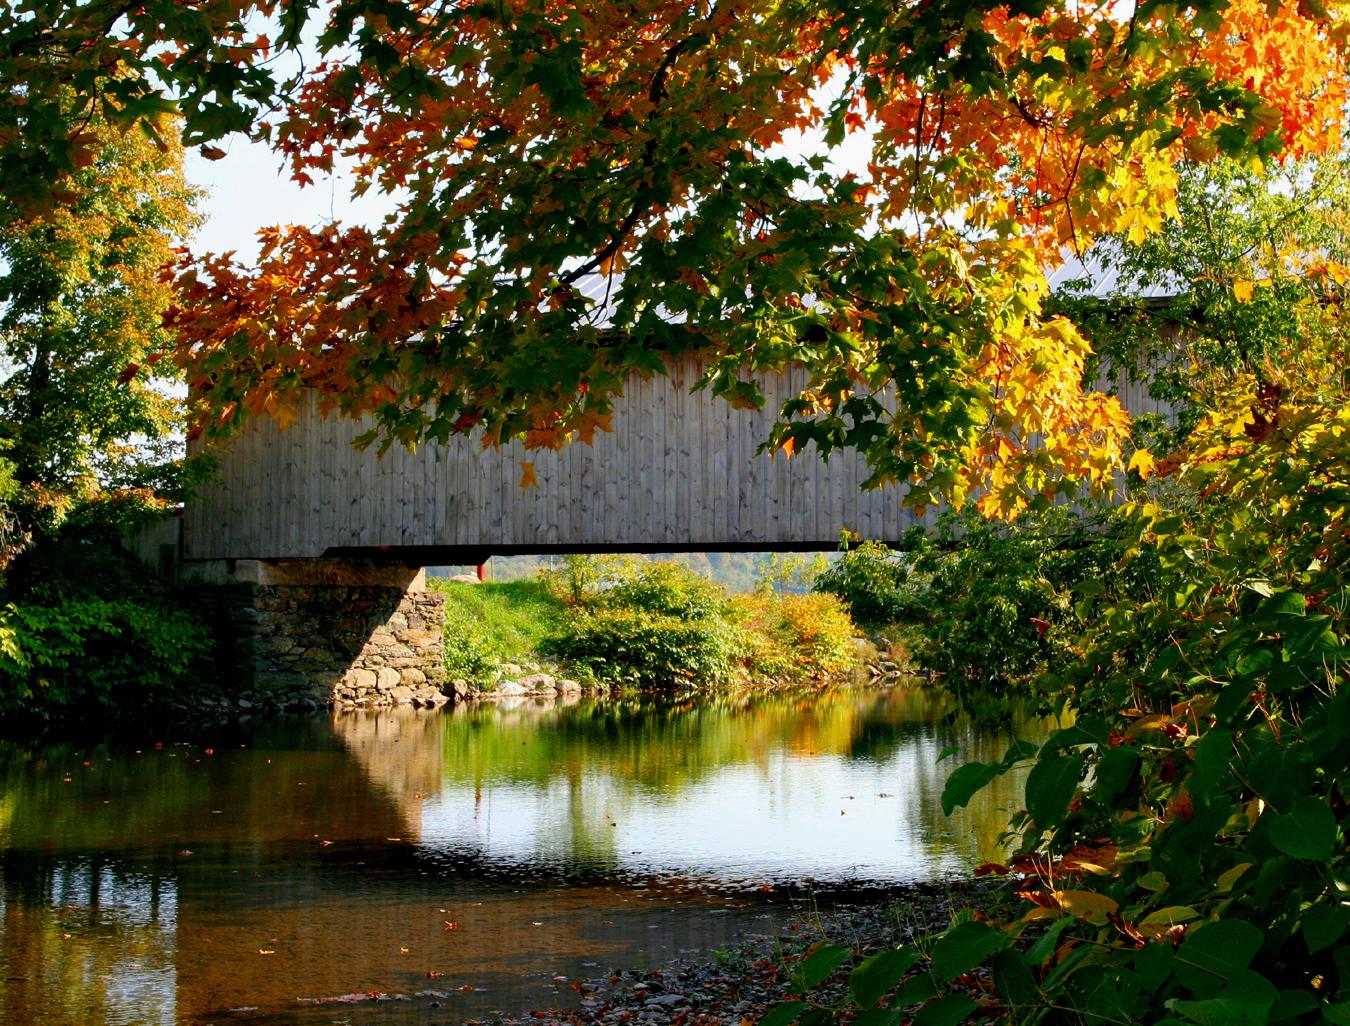 The Covered Bridge In Montgomery, Vt (user submitted)